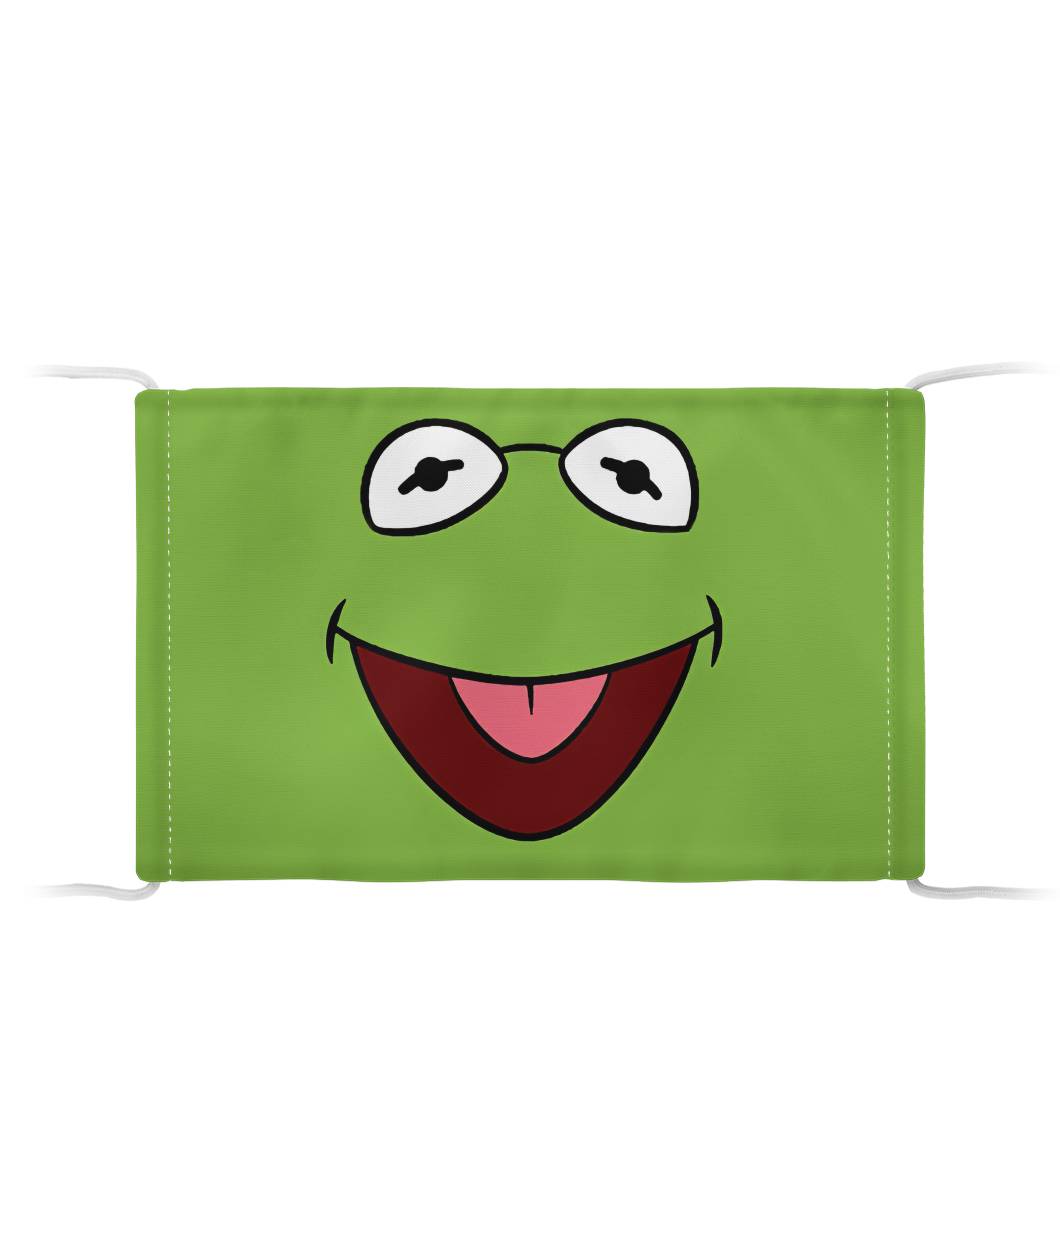 Kermit the frog face mask